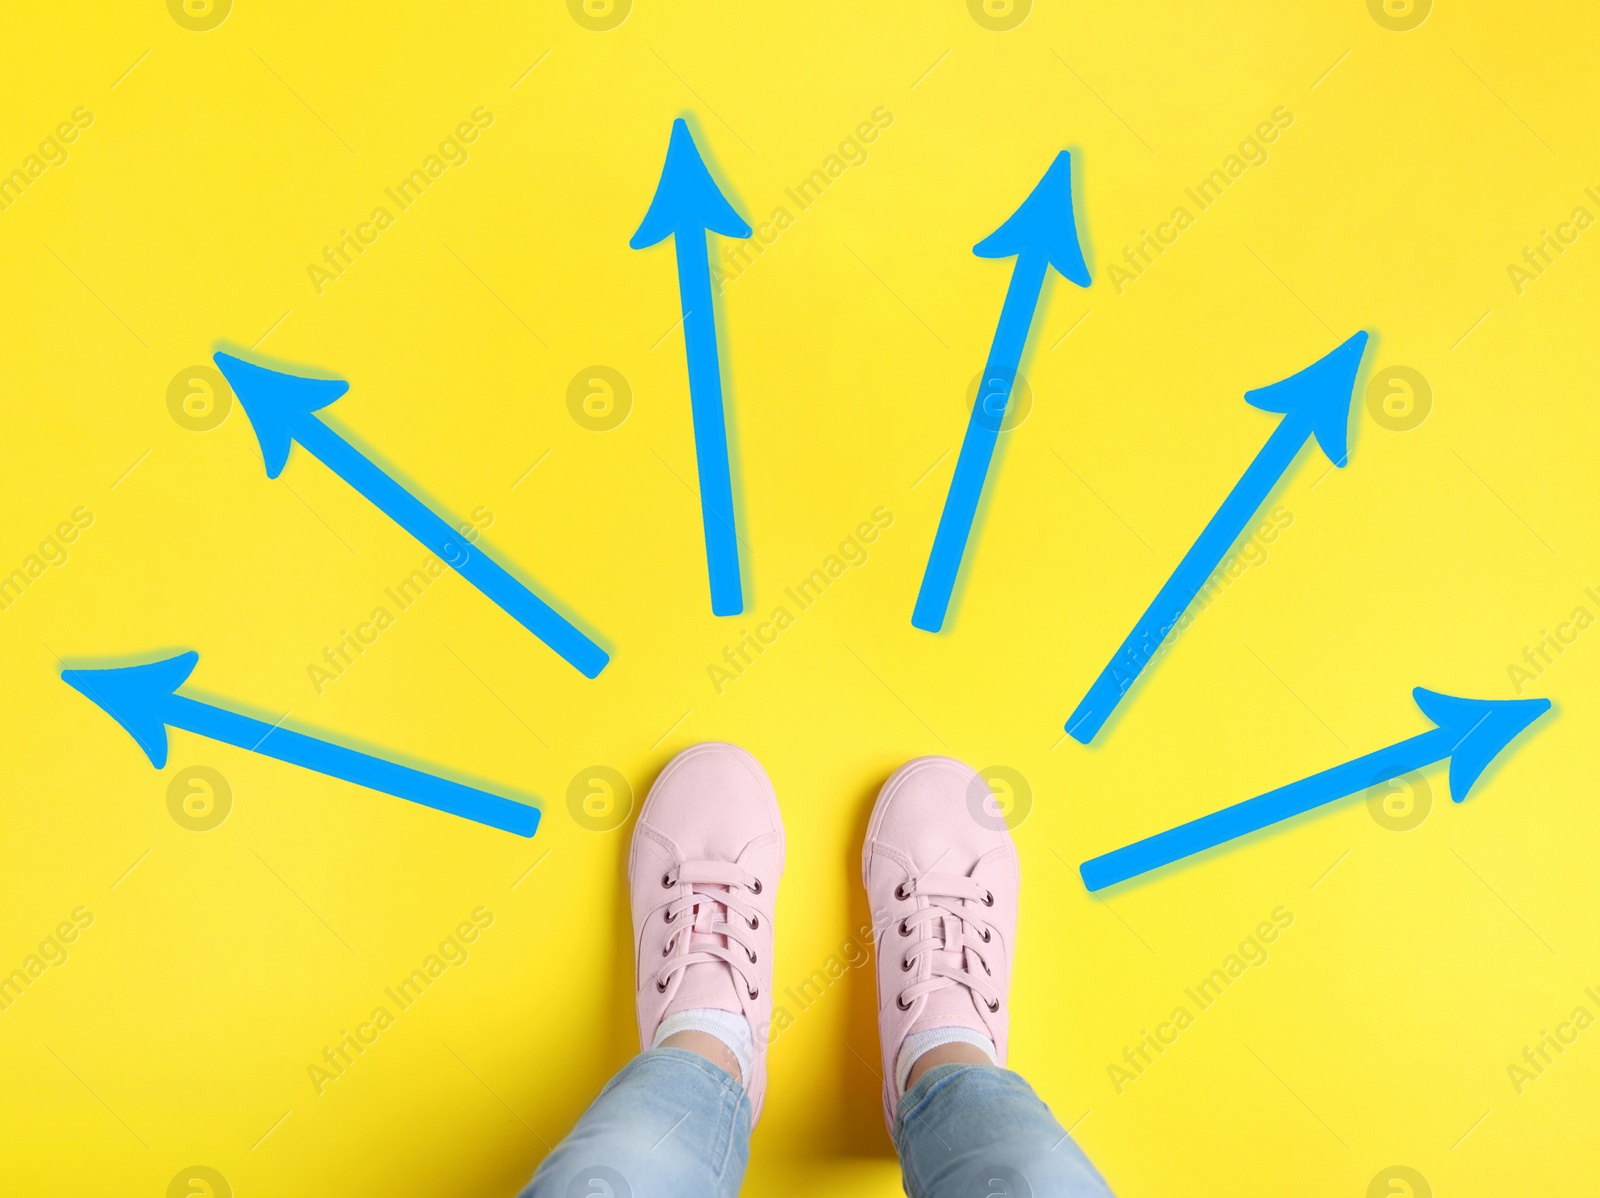 Image of Choosing future profession. Girl standing in front of drawn signs on yellow background, top view. Arrows pointing in different directions symbolizing diversity of opportunities